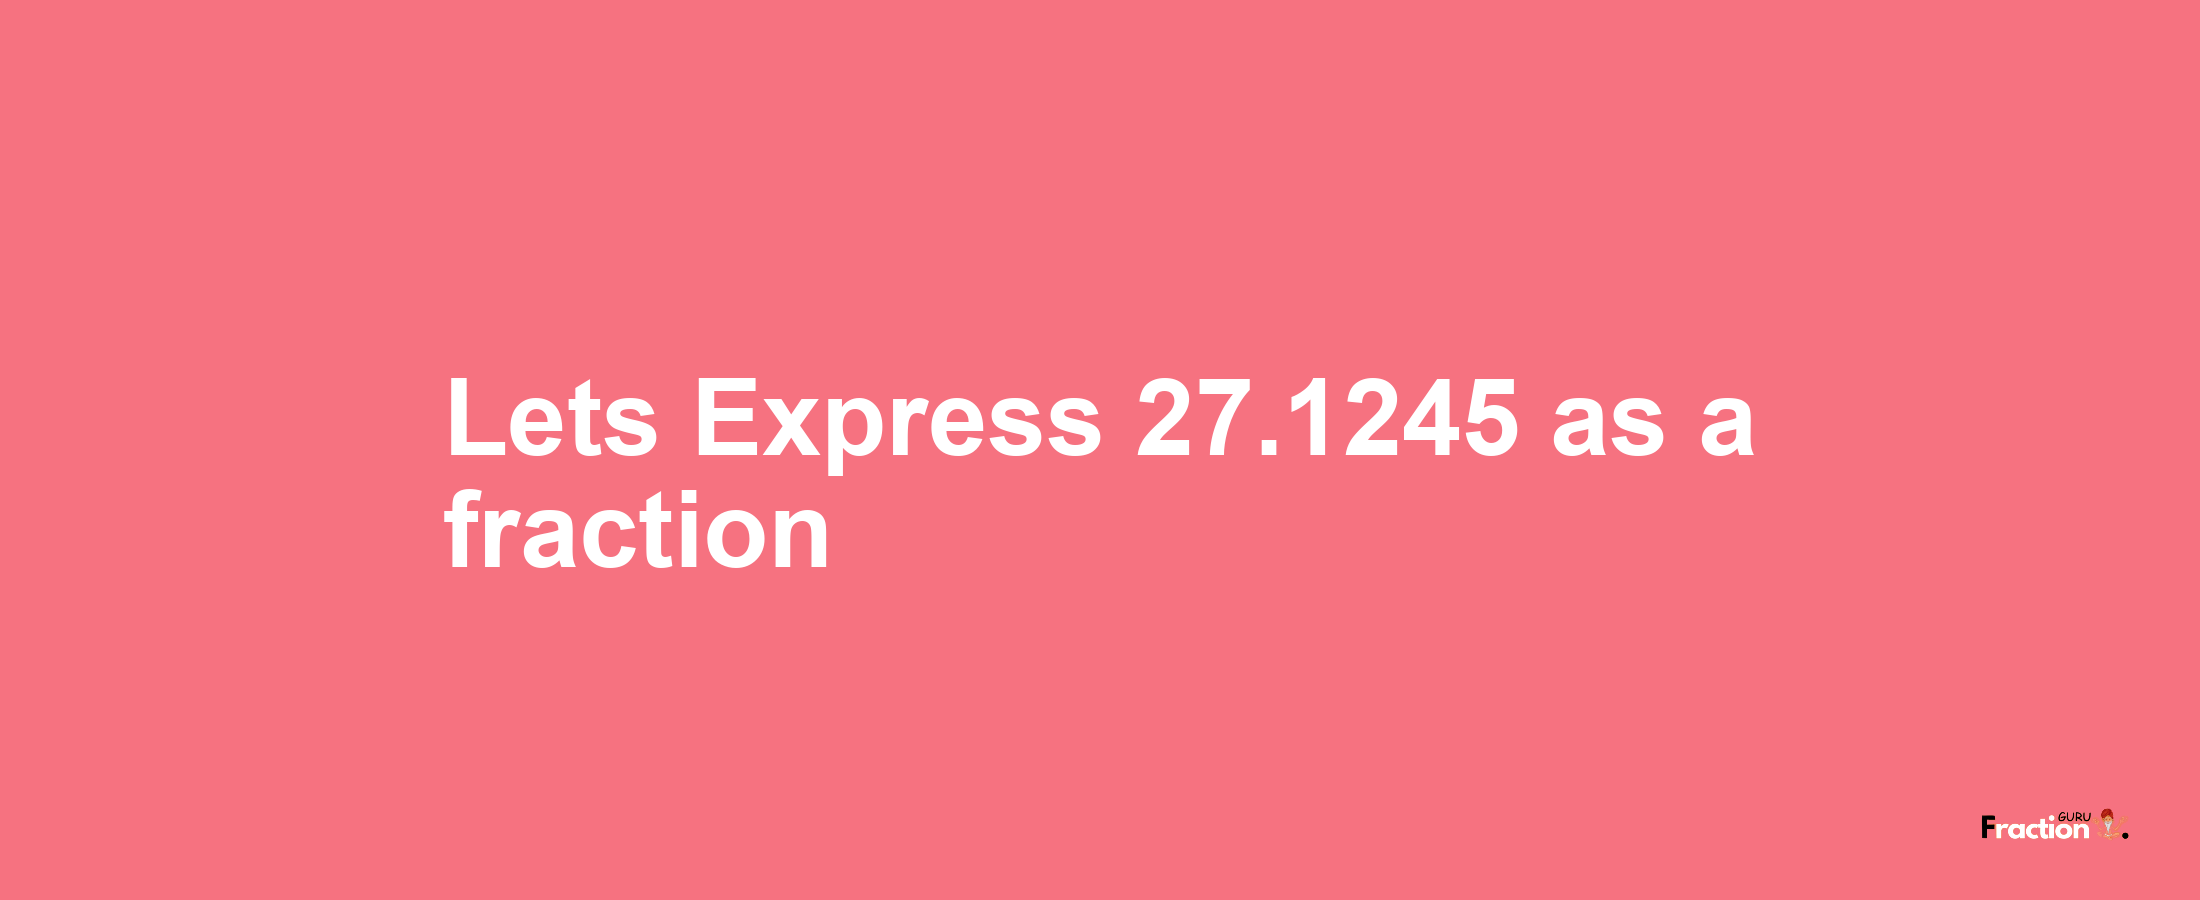 Lets Express 27.1245 as afraction